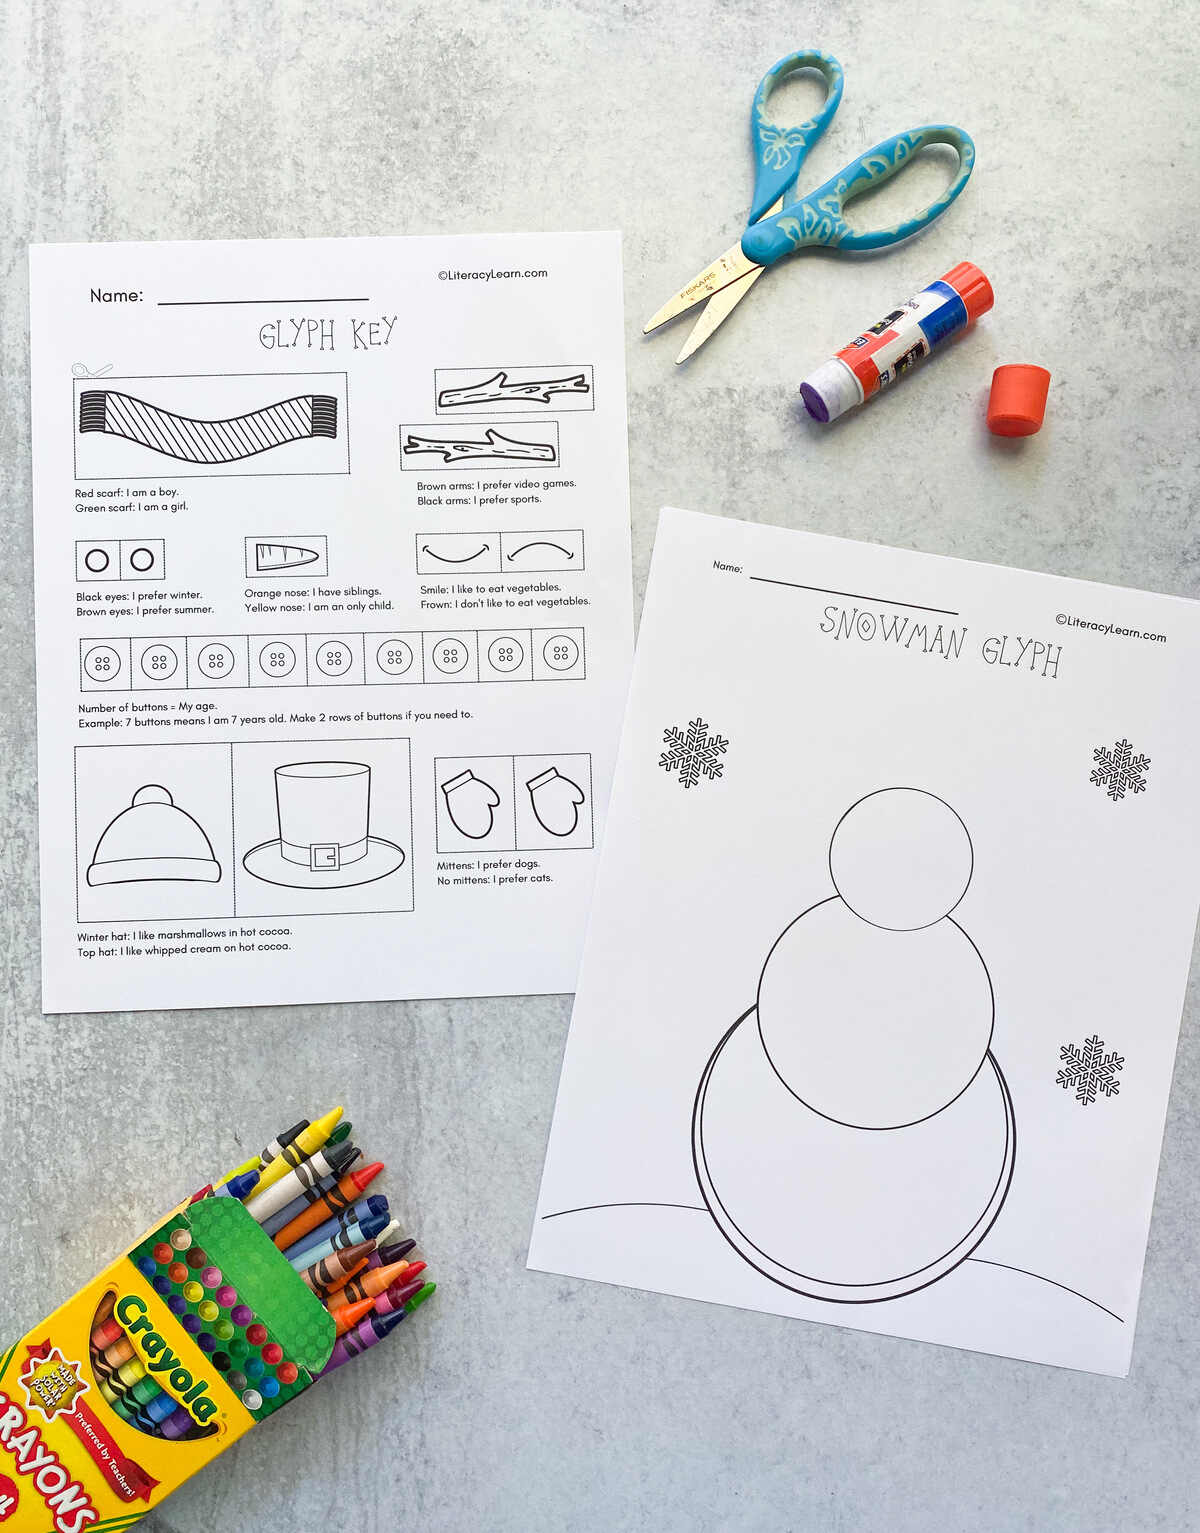 Printed snowman glyph and key printed beside crayons, glue stick, and scissors. 